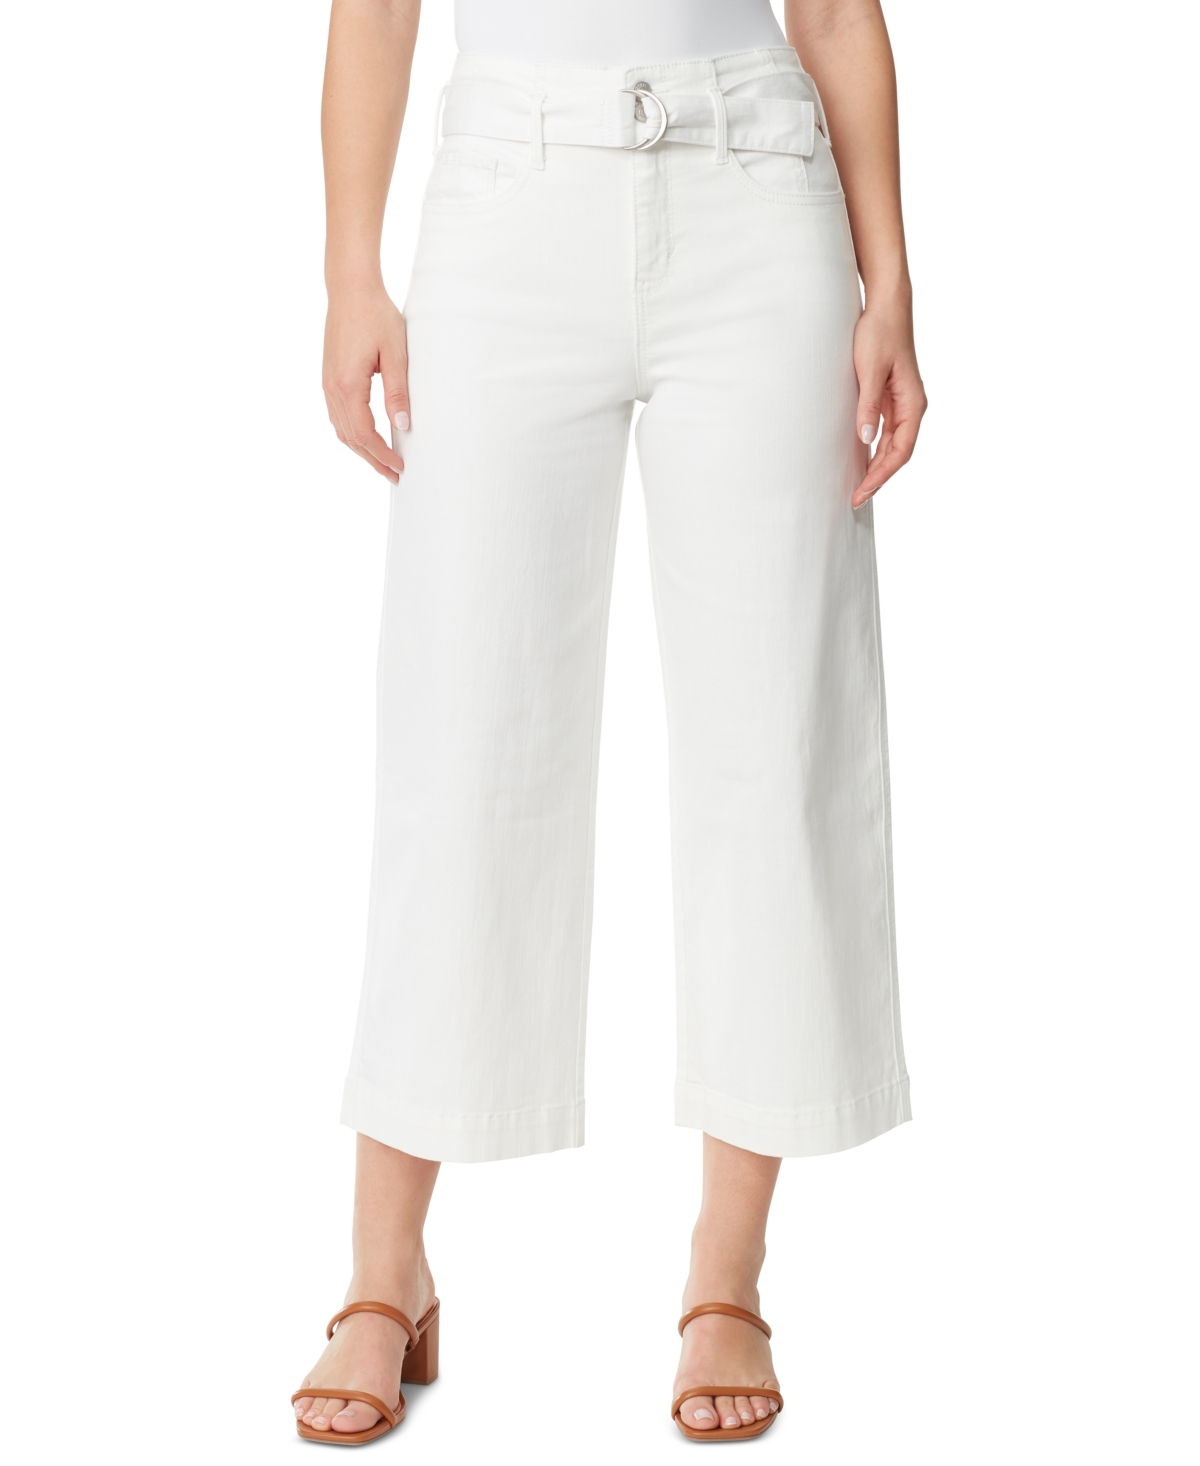 Women's Cropped Wide-Leg Belted Jeans - Caraway Wash